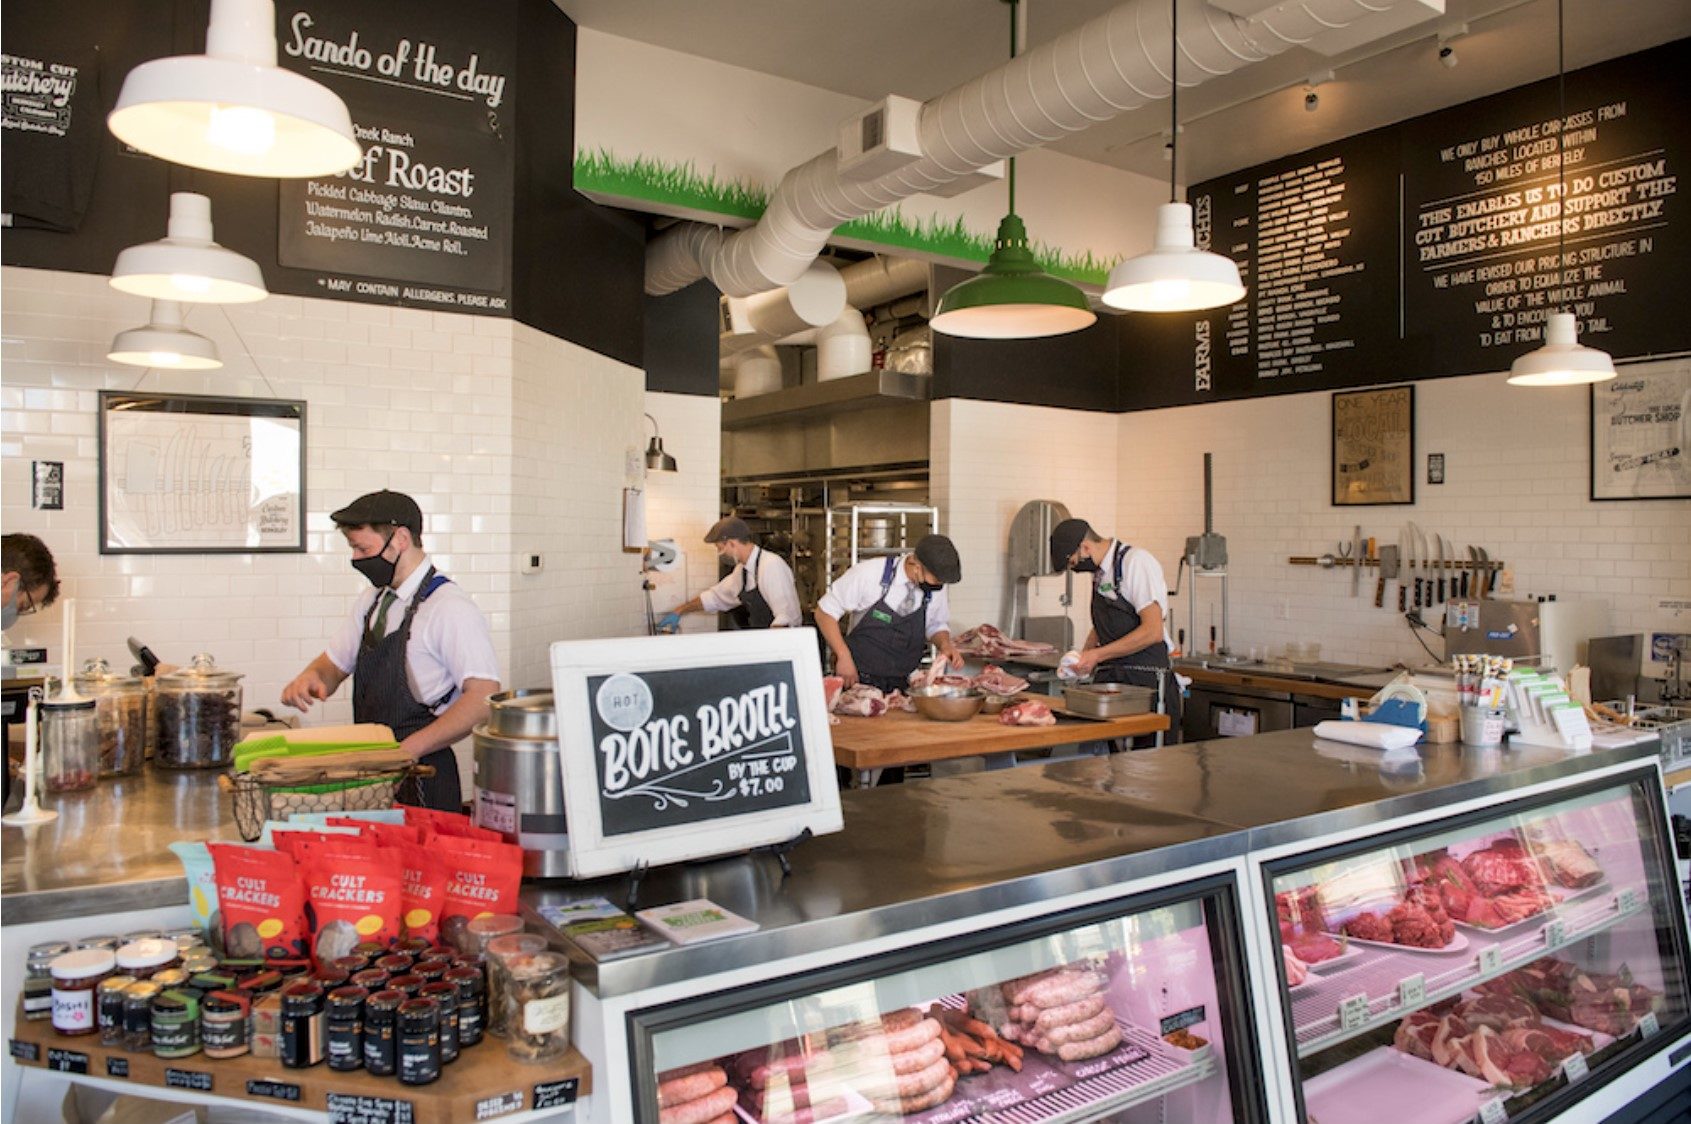 The Local Butcher Shop sells locally sourced and sustainably raised meat. Credit: Kevin Meynell